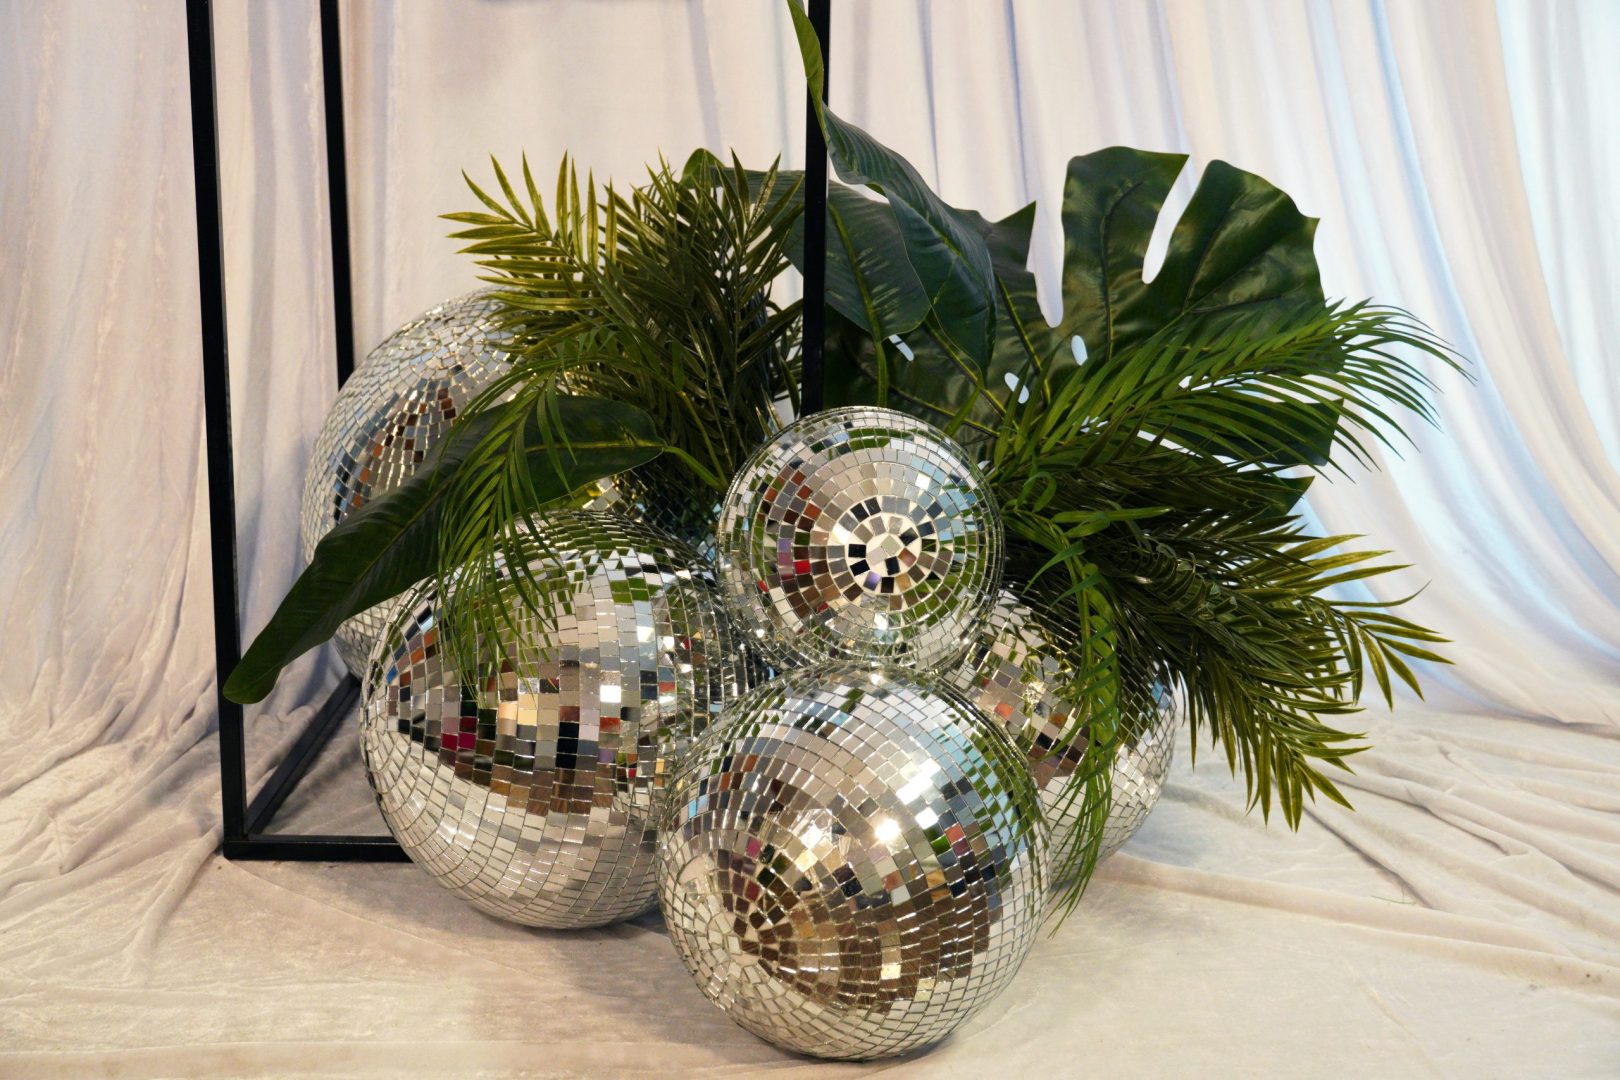 silver mirror balls and greenery